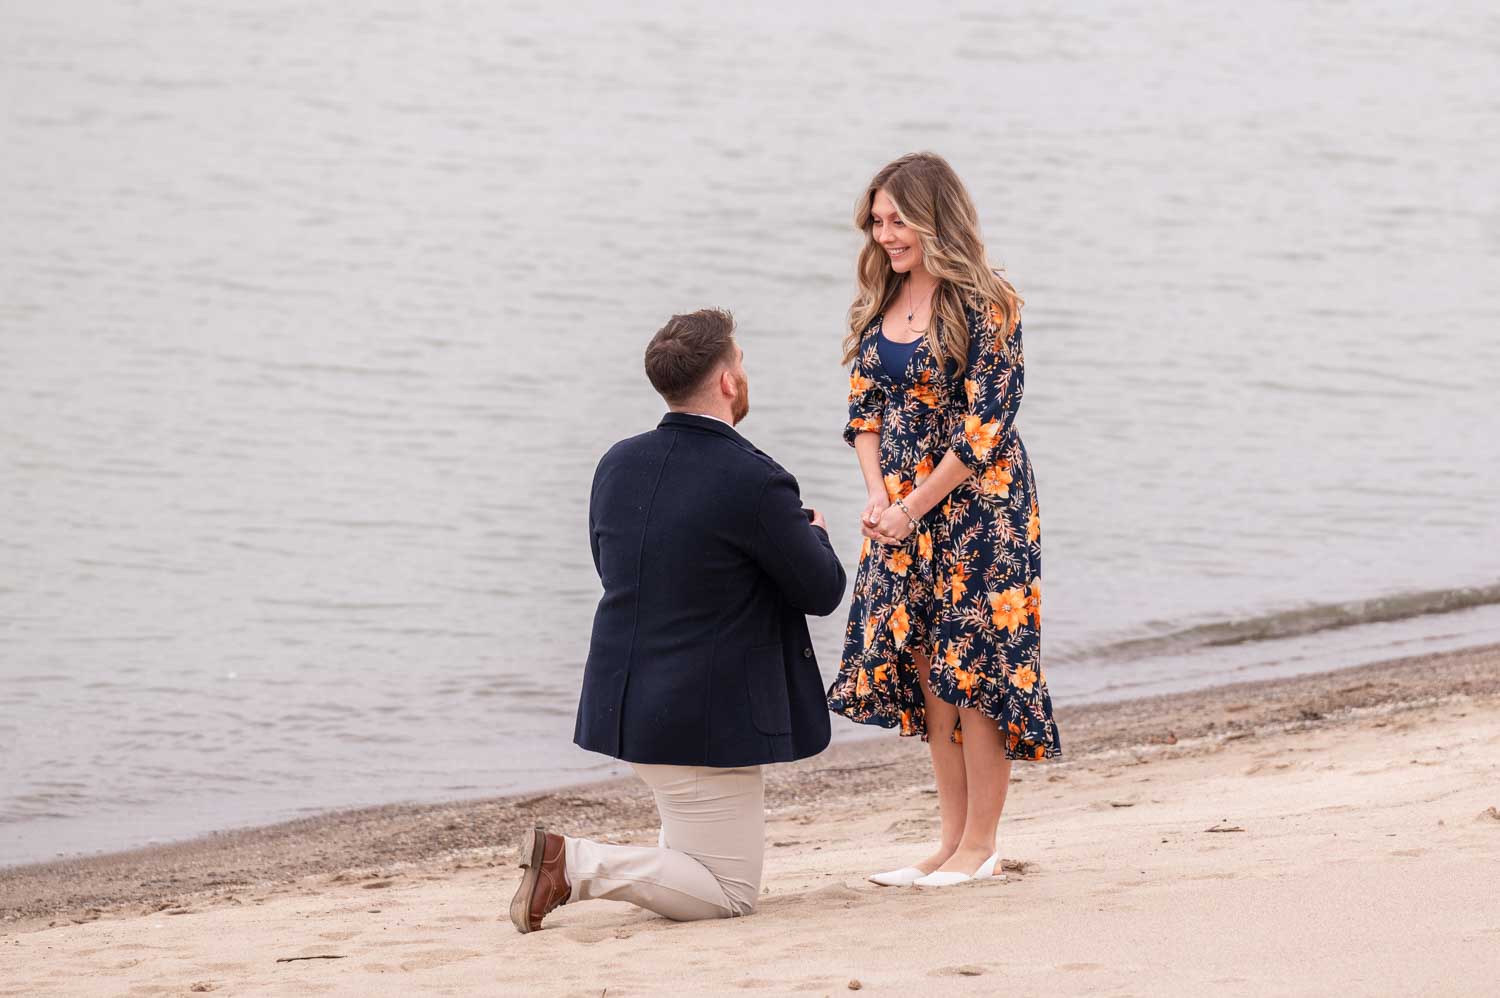 Man proposing to his girlfriend on the beach